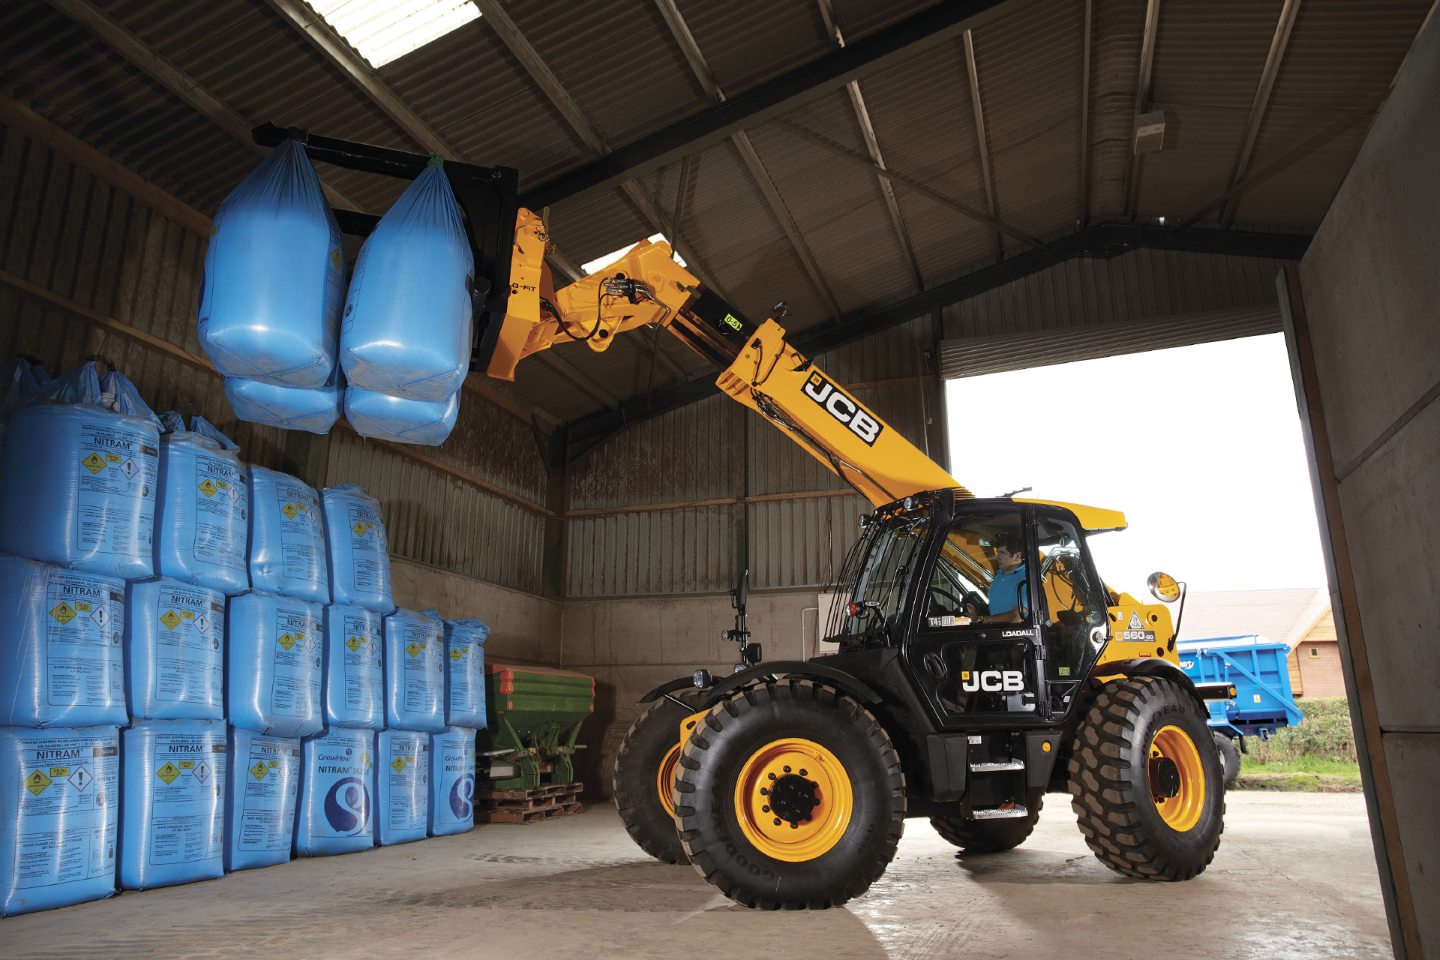 Fertiliser stores could be targeted by thieves, warns NFU Mutual.